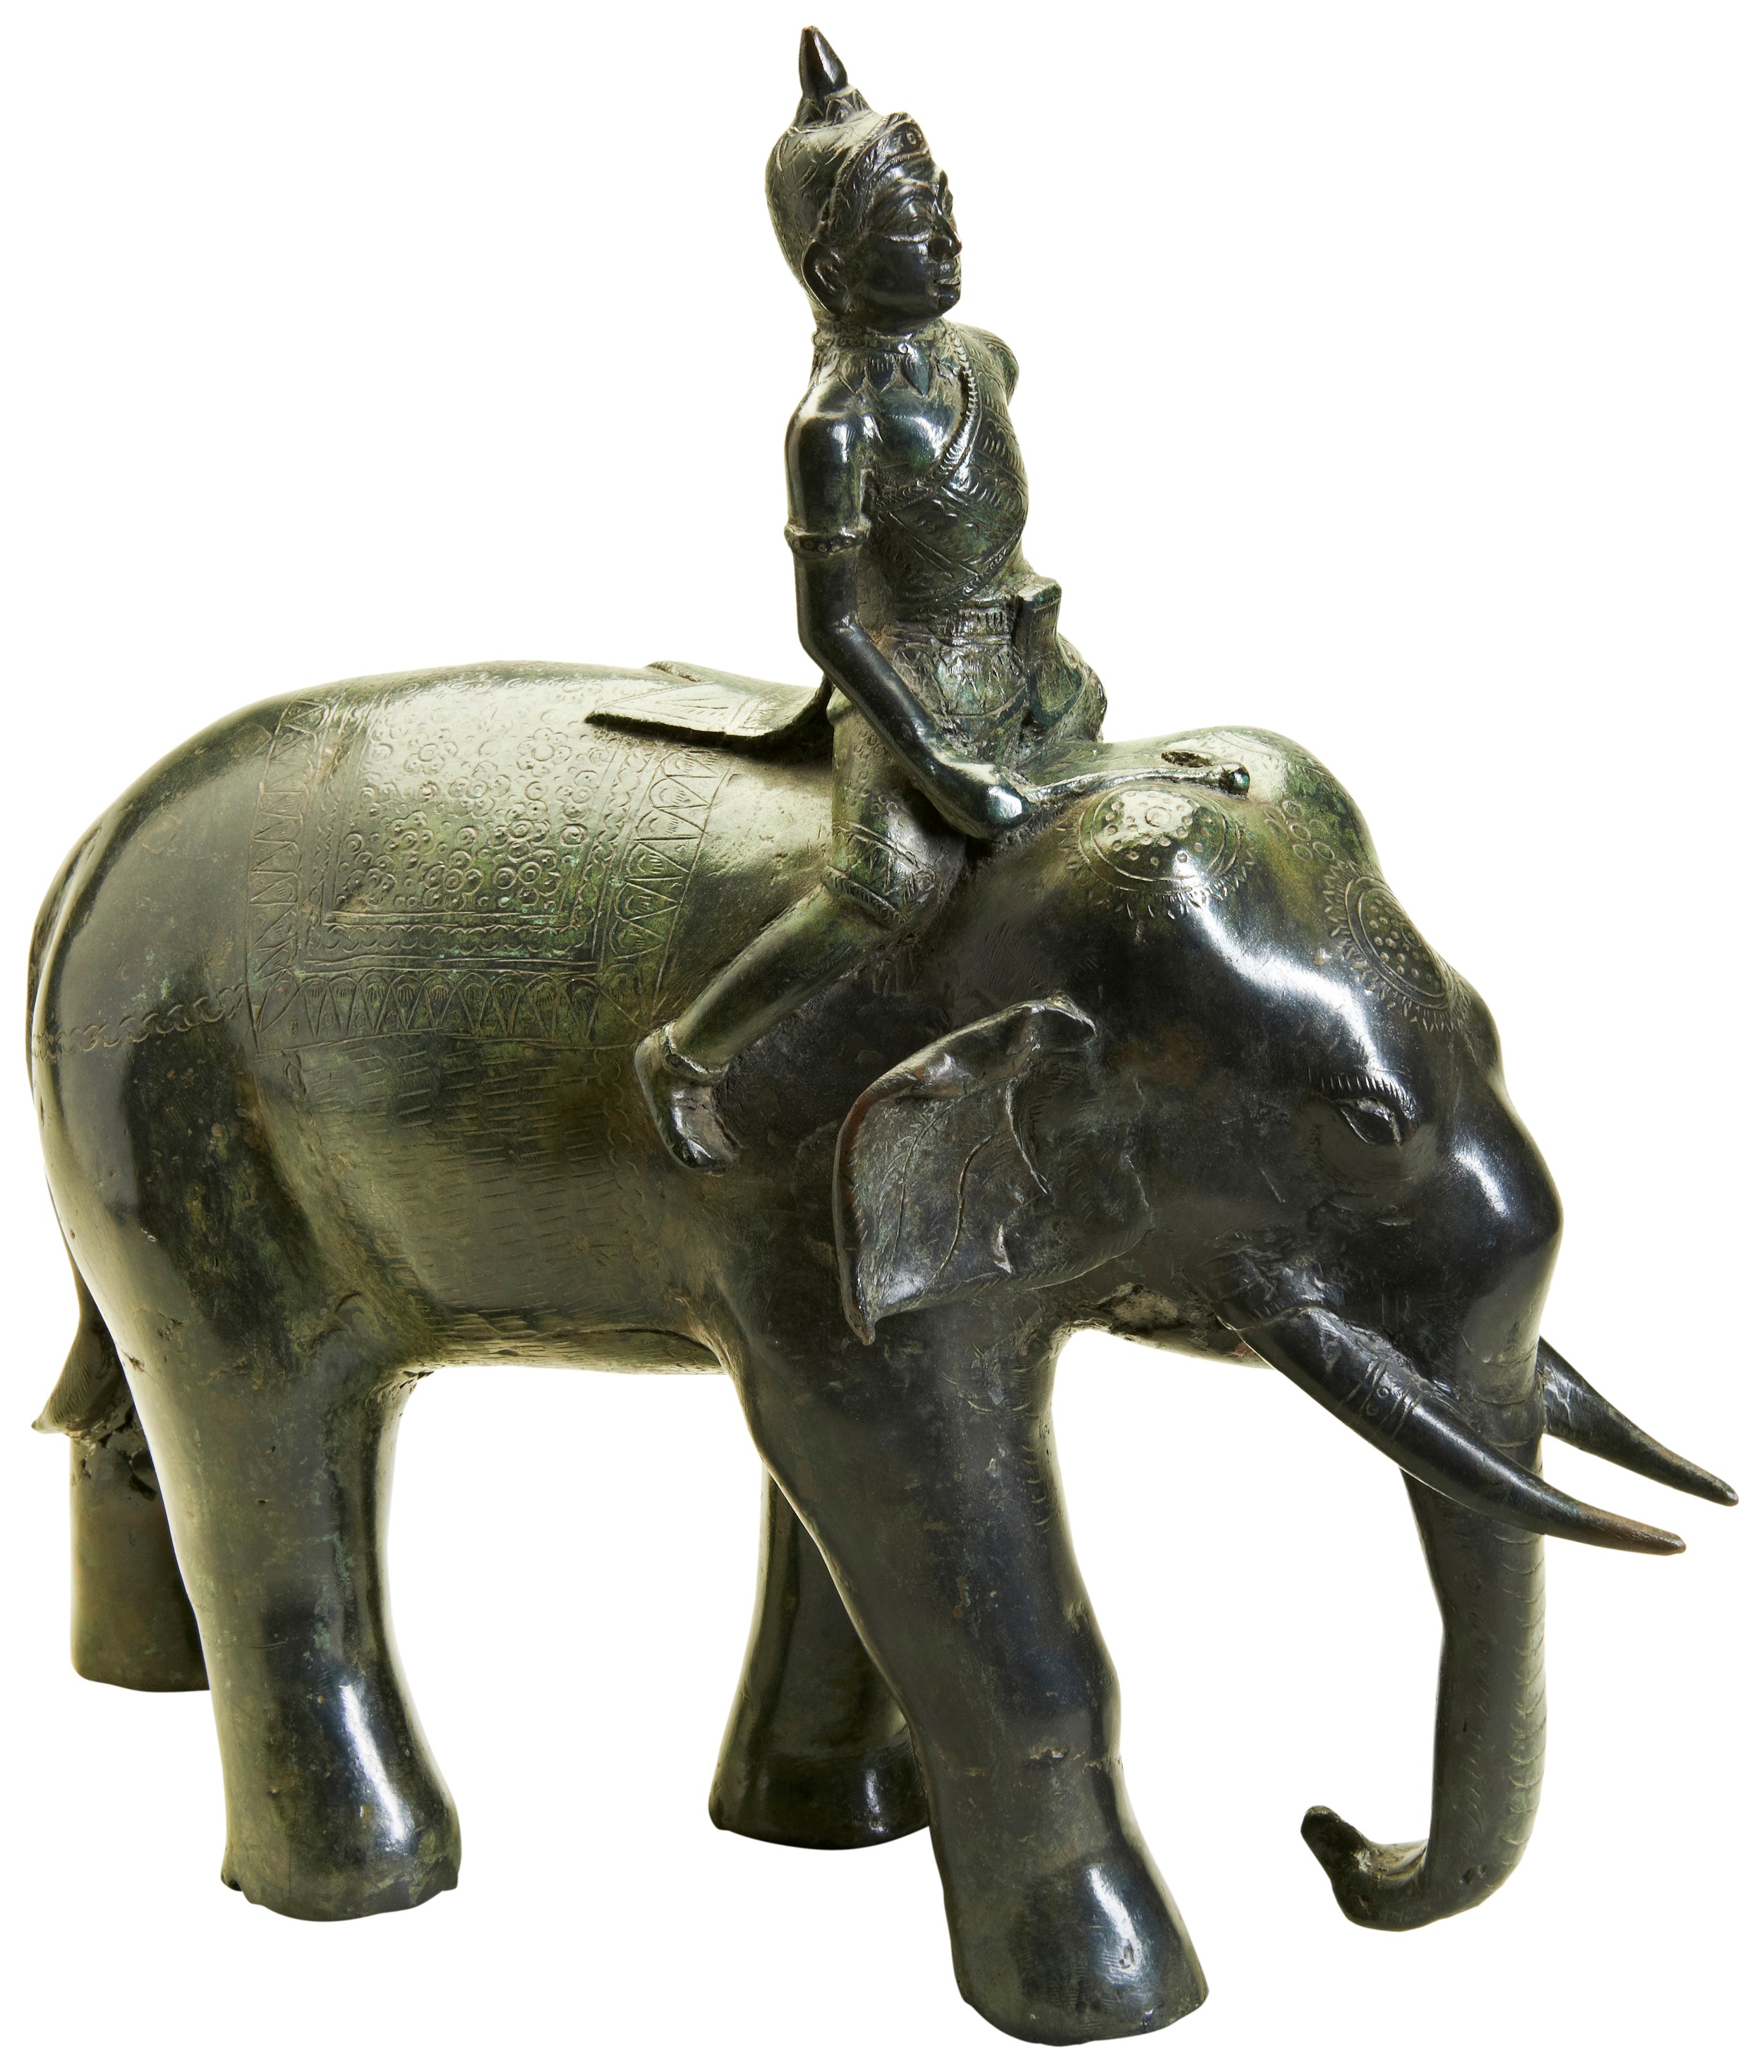 LARGE BRONZE FIGURE OF AN INDRA RIDING AN ELEPHANT  INDIA, LATE 19TH / EARLY 20TH CENTURY